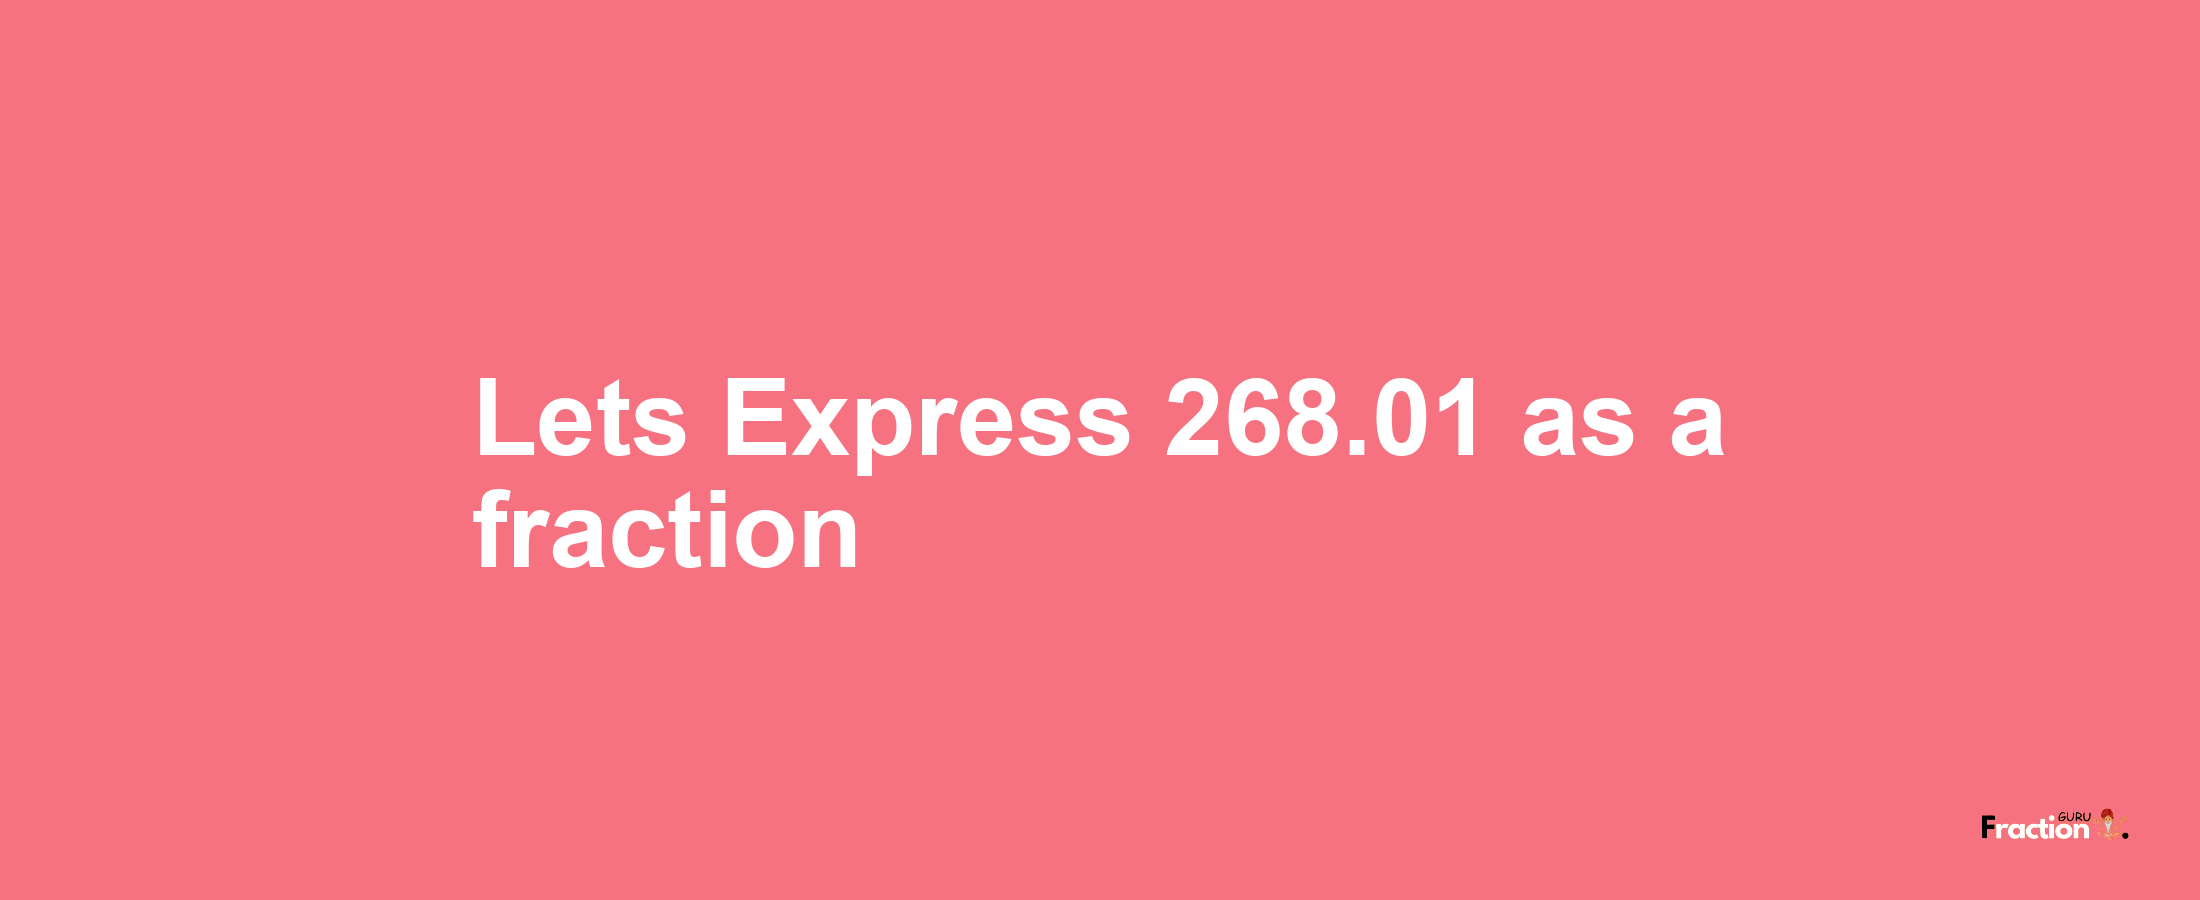 Lets Express 268.01 as afraction